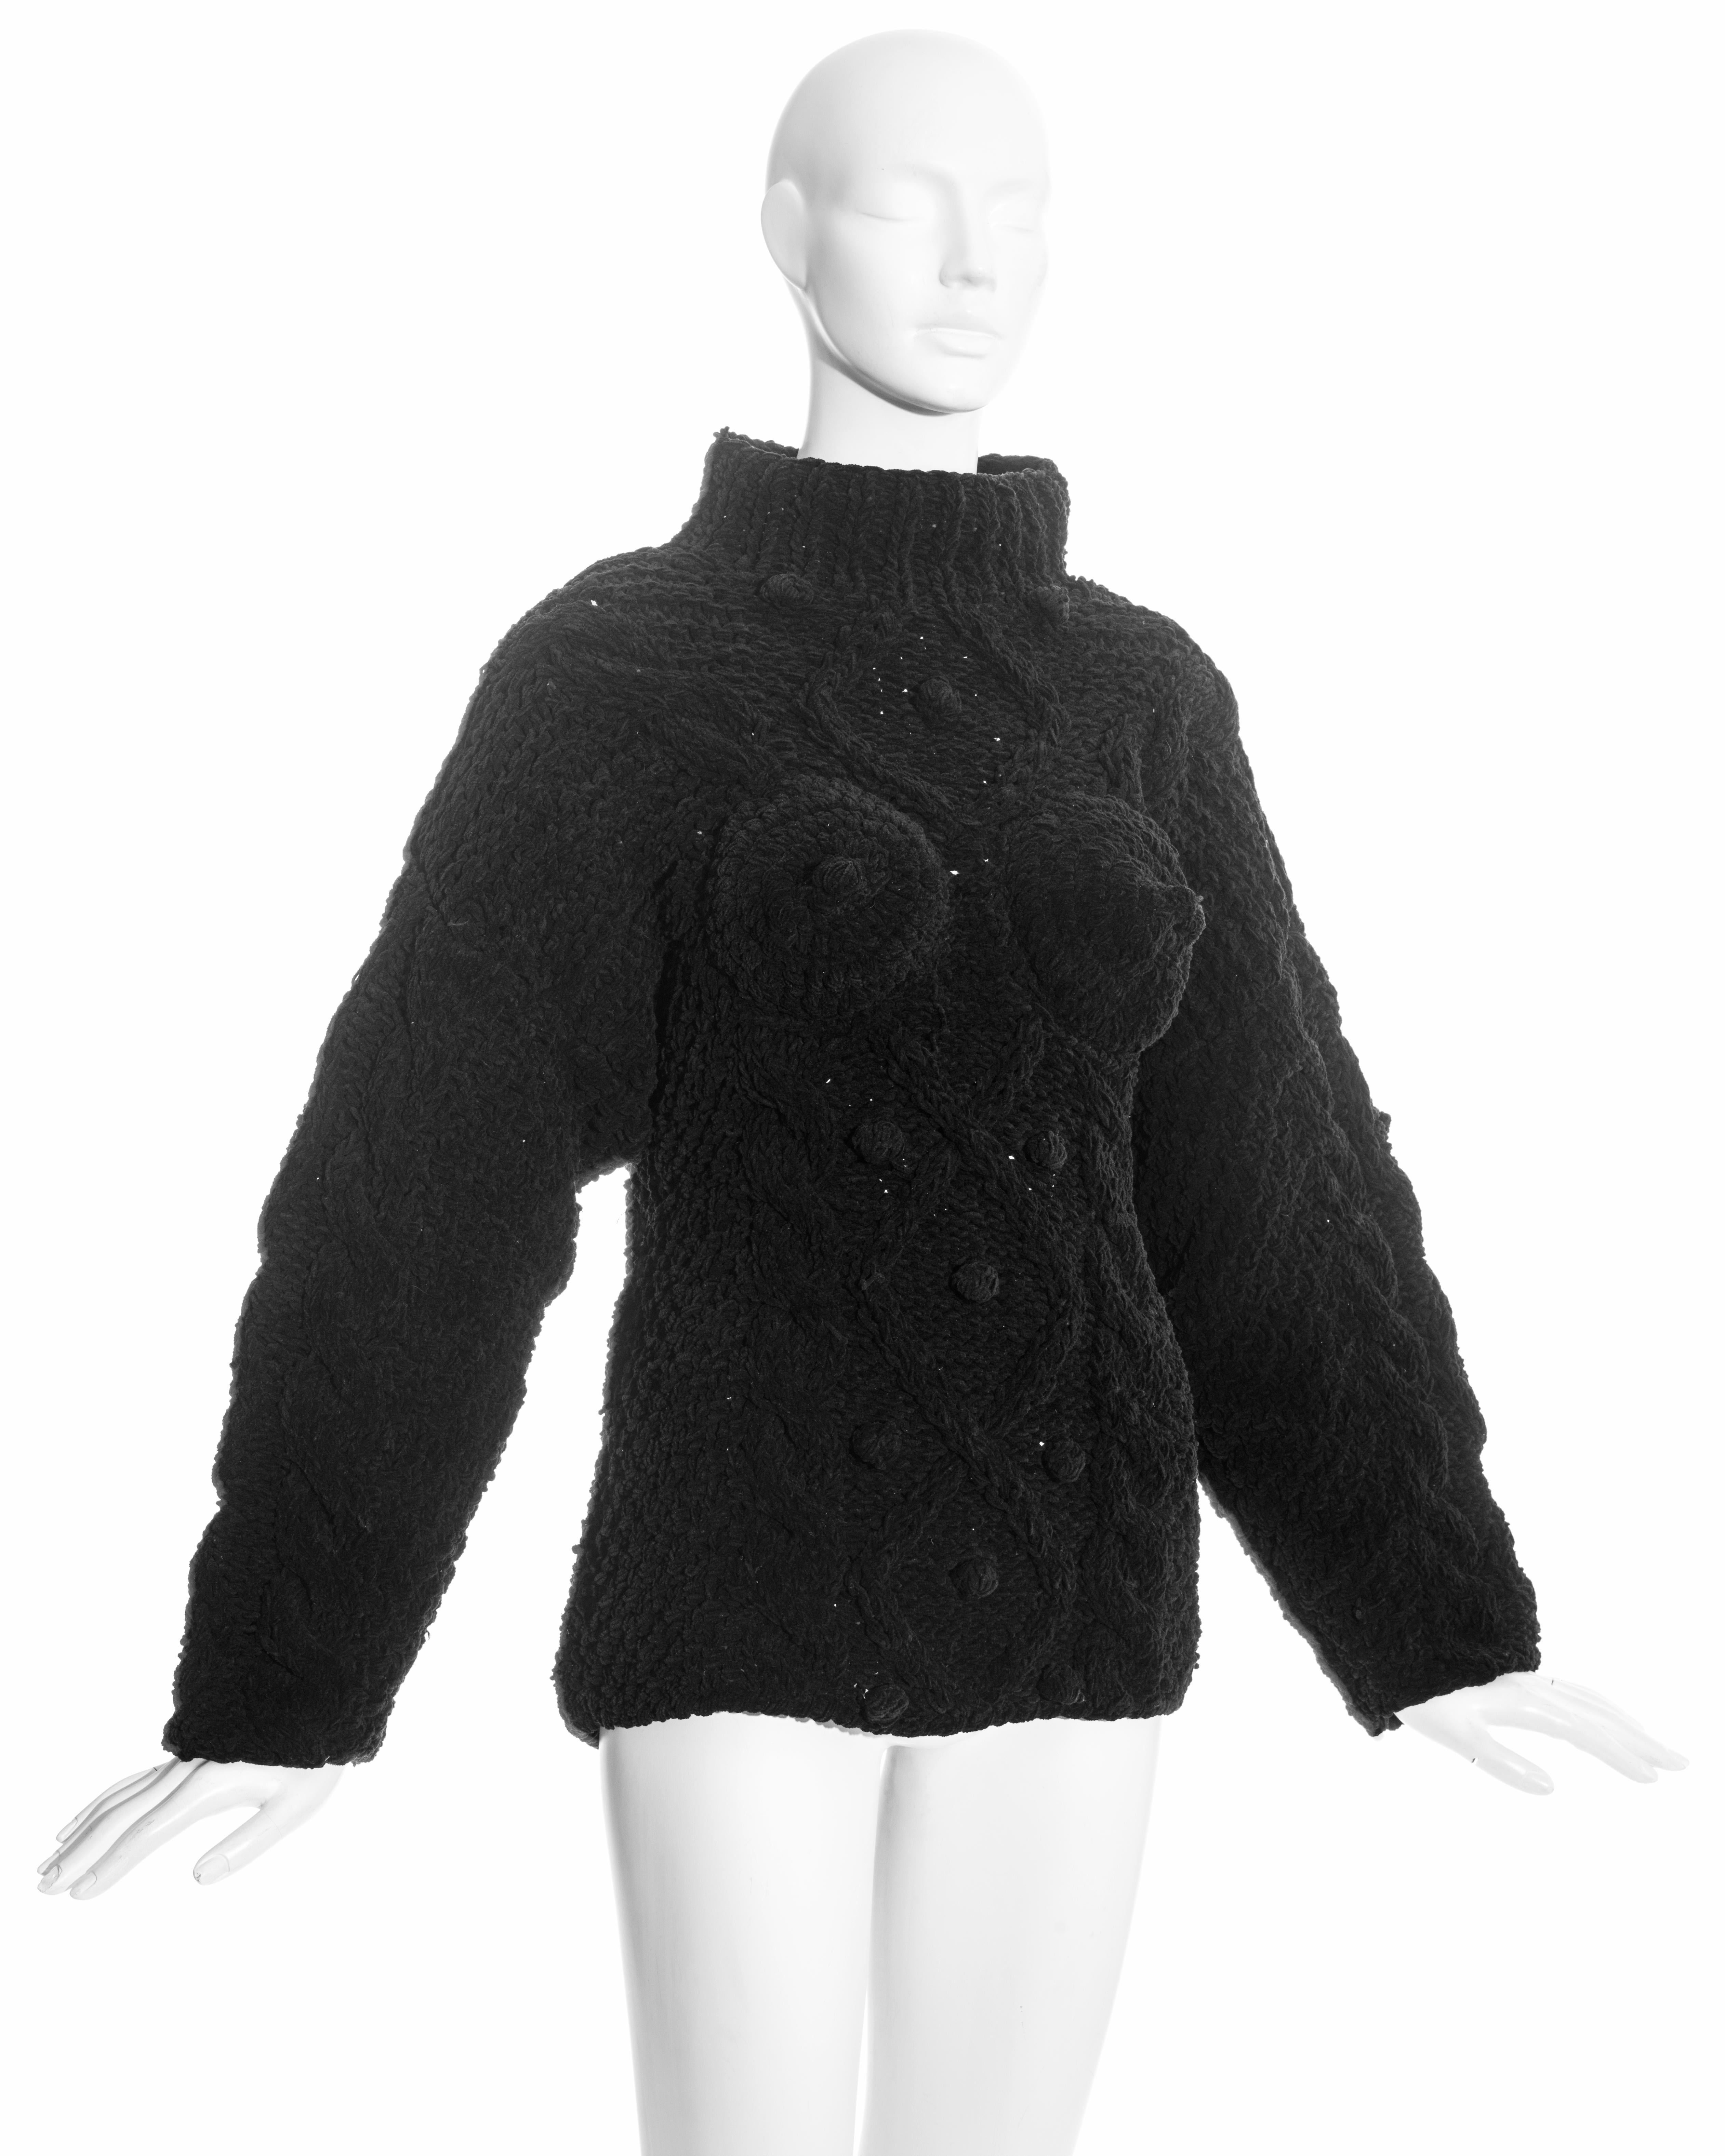 Jean Paul Gaultier black chenille aran pullover sweater with wide standing collar, zip fastening at centre-back and signature Gaultier conical breast panels with nipples. 

Fall-Winter 1985